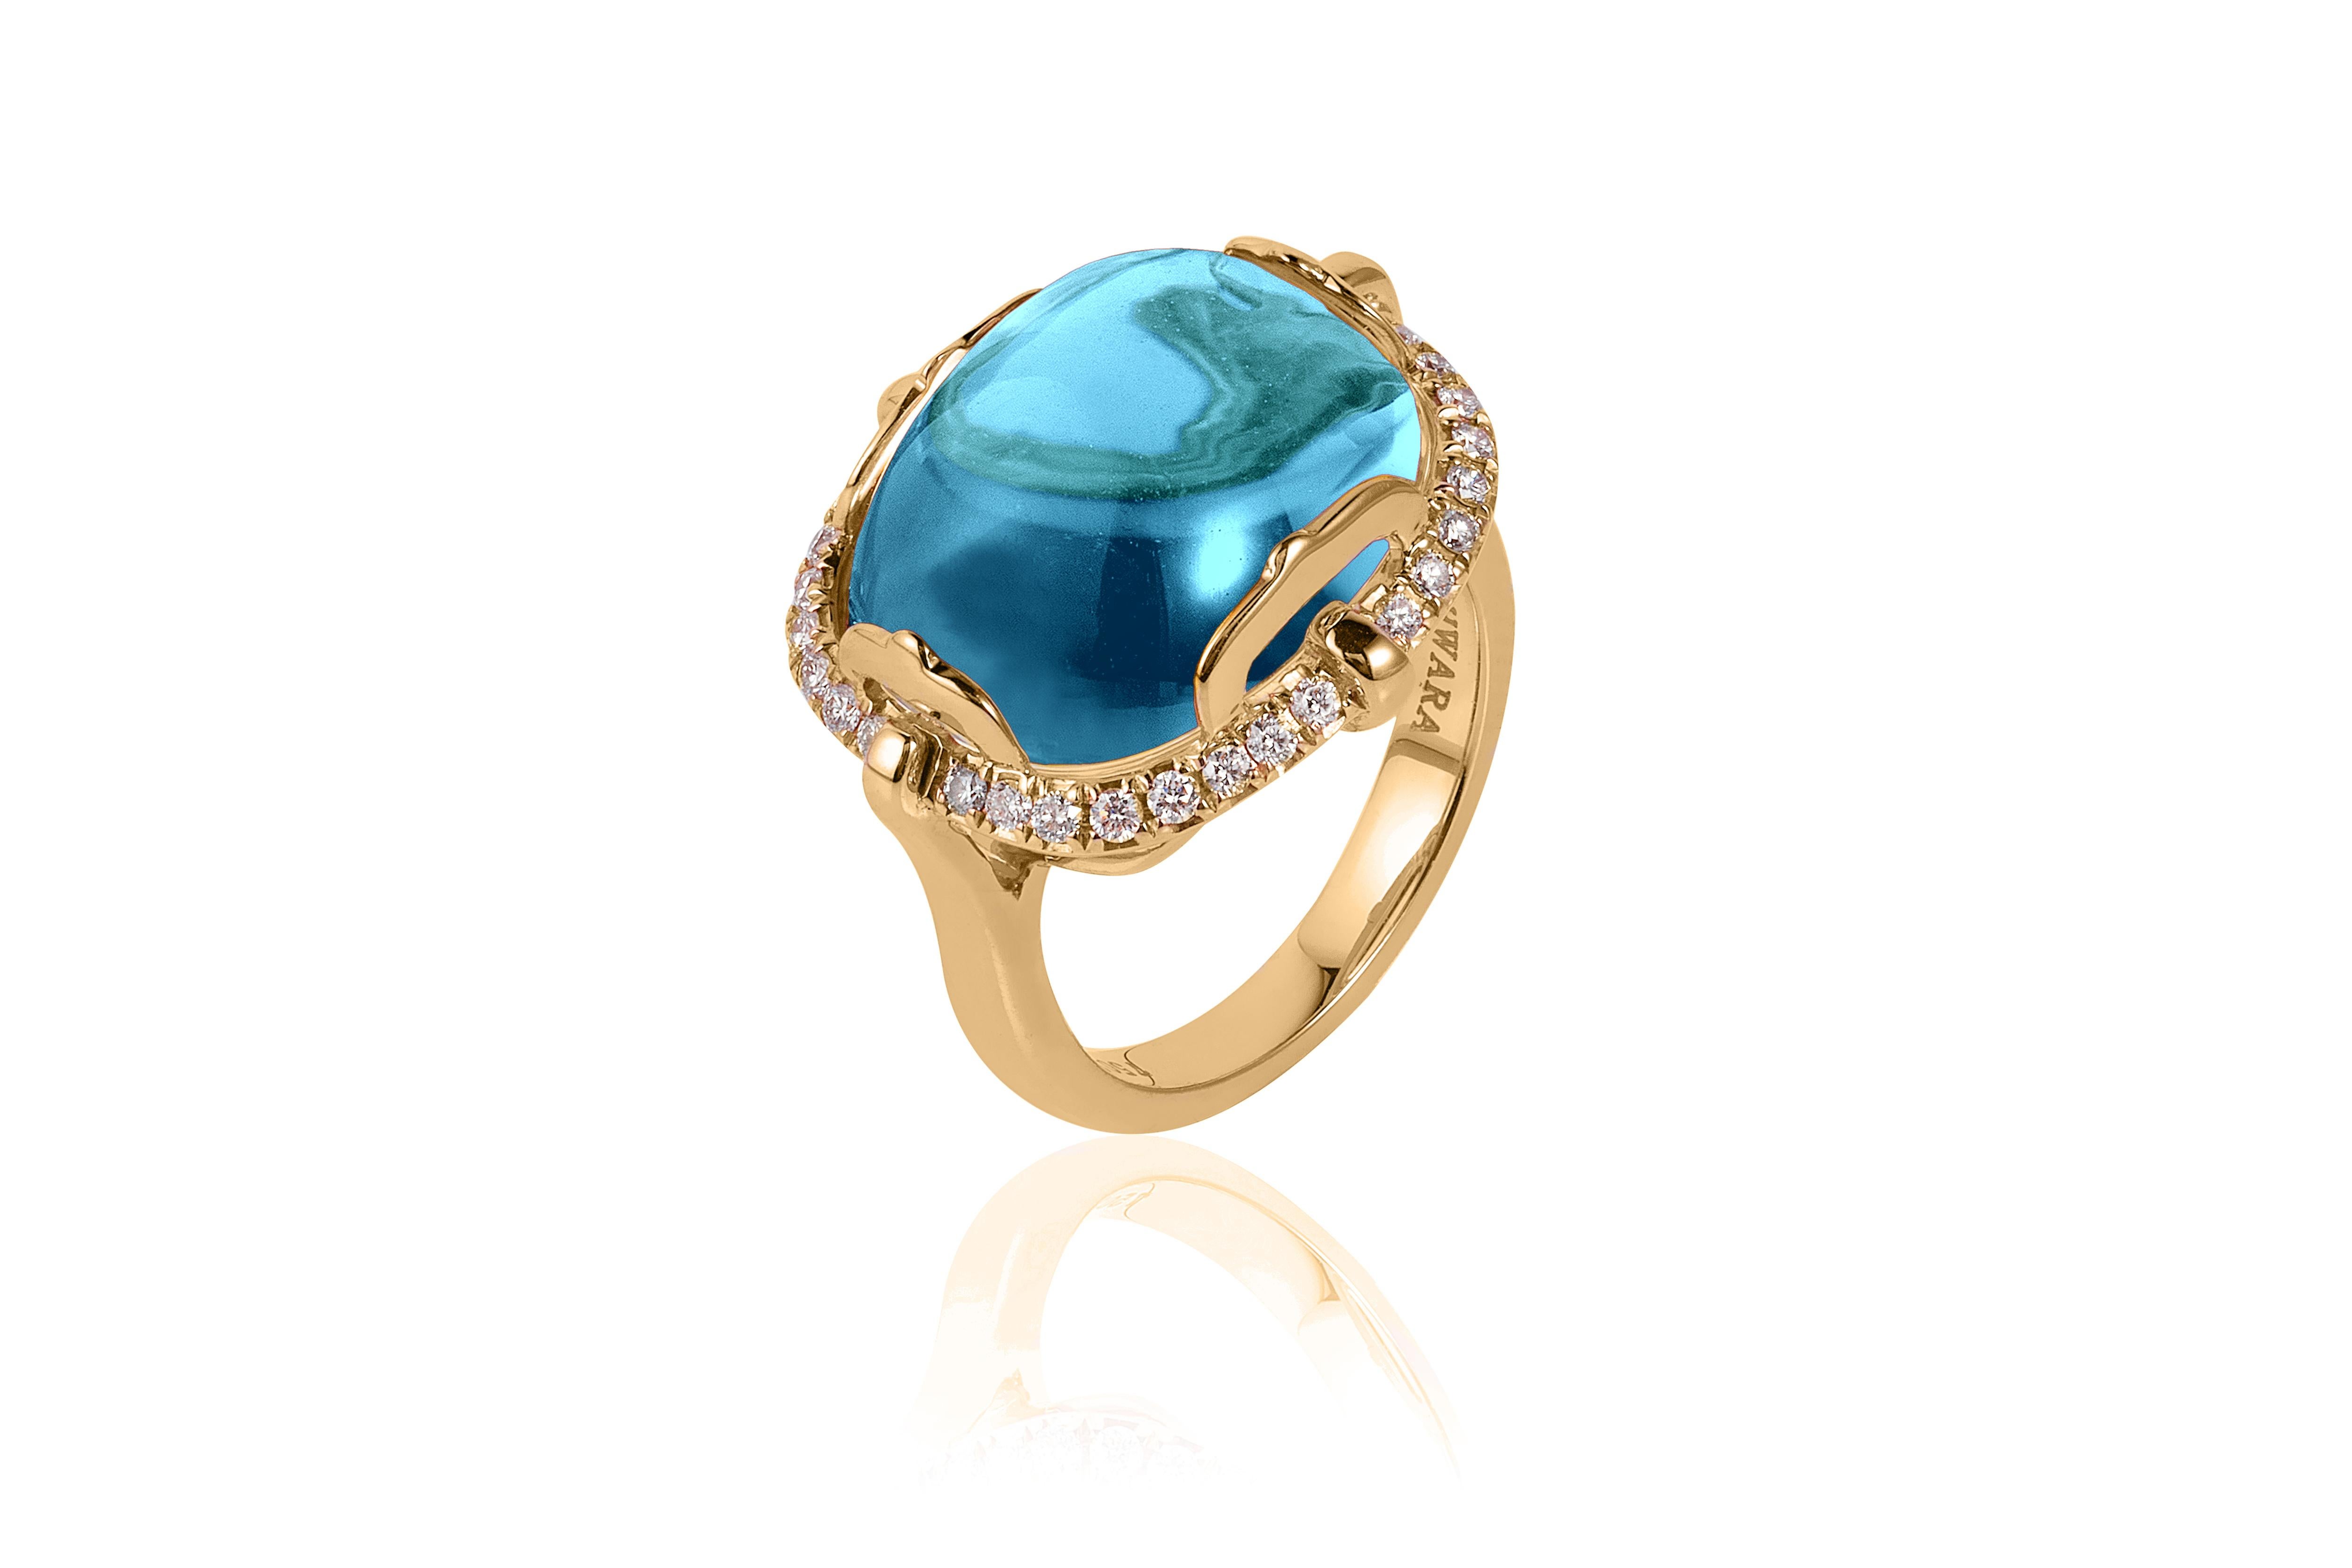 Blue Topaz Cushion Cabochon Ring in 18K Yellow Gold with Diamonds from 'Rock 'N Roll' Collection

Stone Size: 16 x 13 mm 

Gemstone Approx Wt: Blue Topaz- 15.6 Carats

Diamonds: G-H / VS, Approx Wt:0.34 Carats